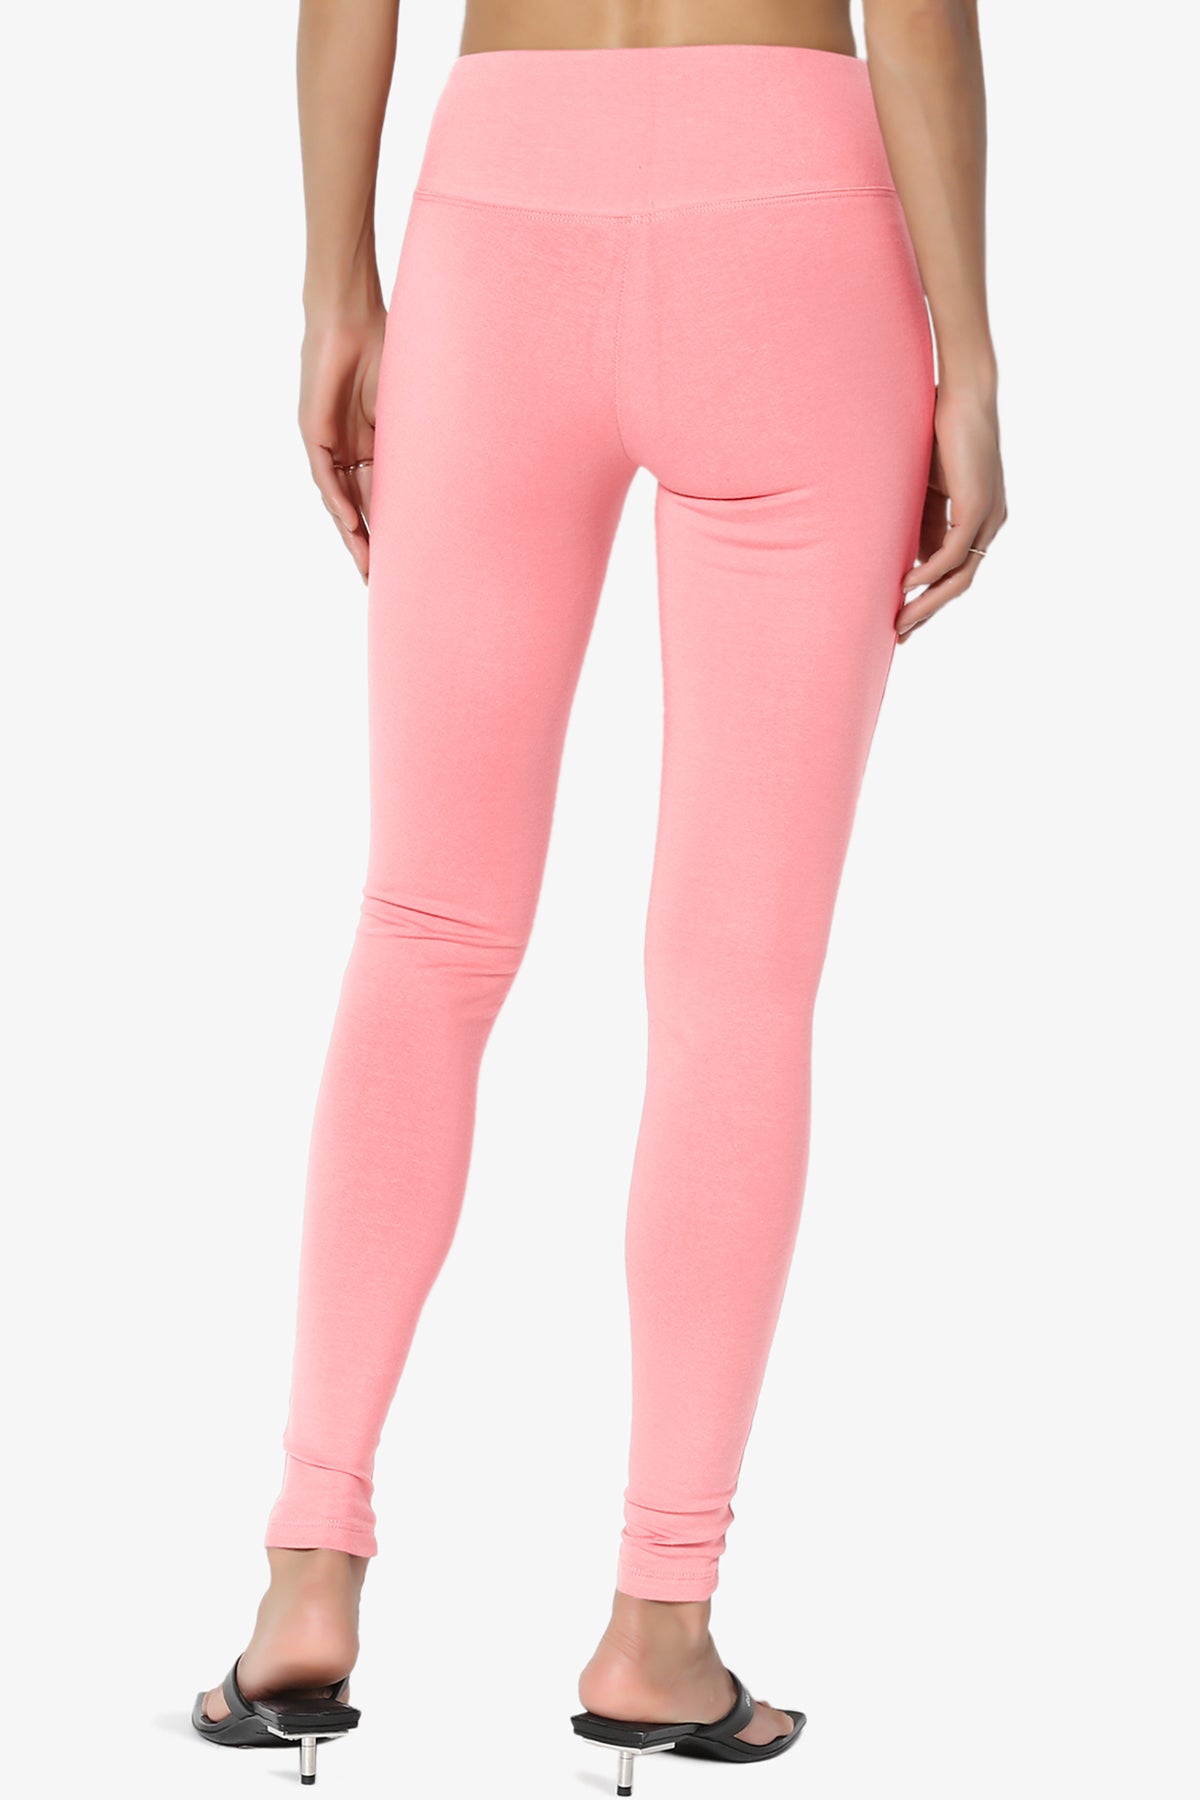 Load image into Gallery viewer, Ansley Cotton Wide Waistband Ankle Leggings PLUS
